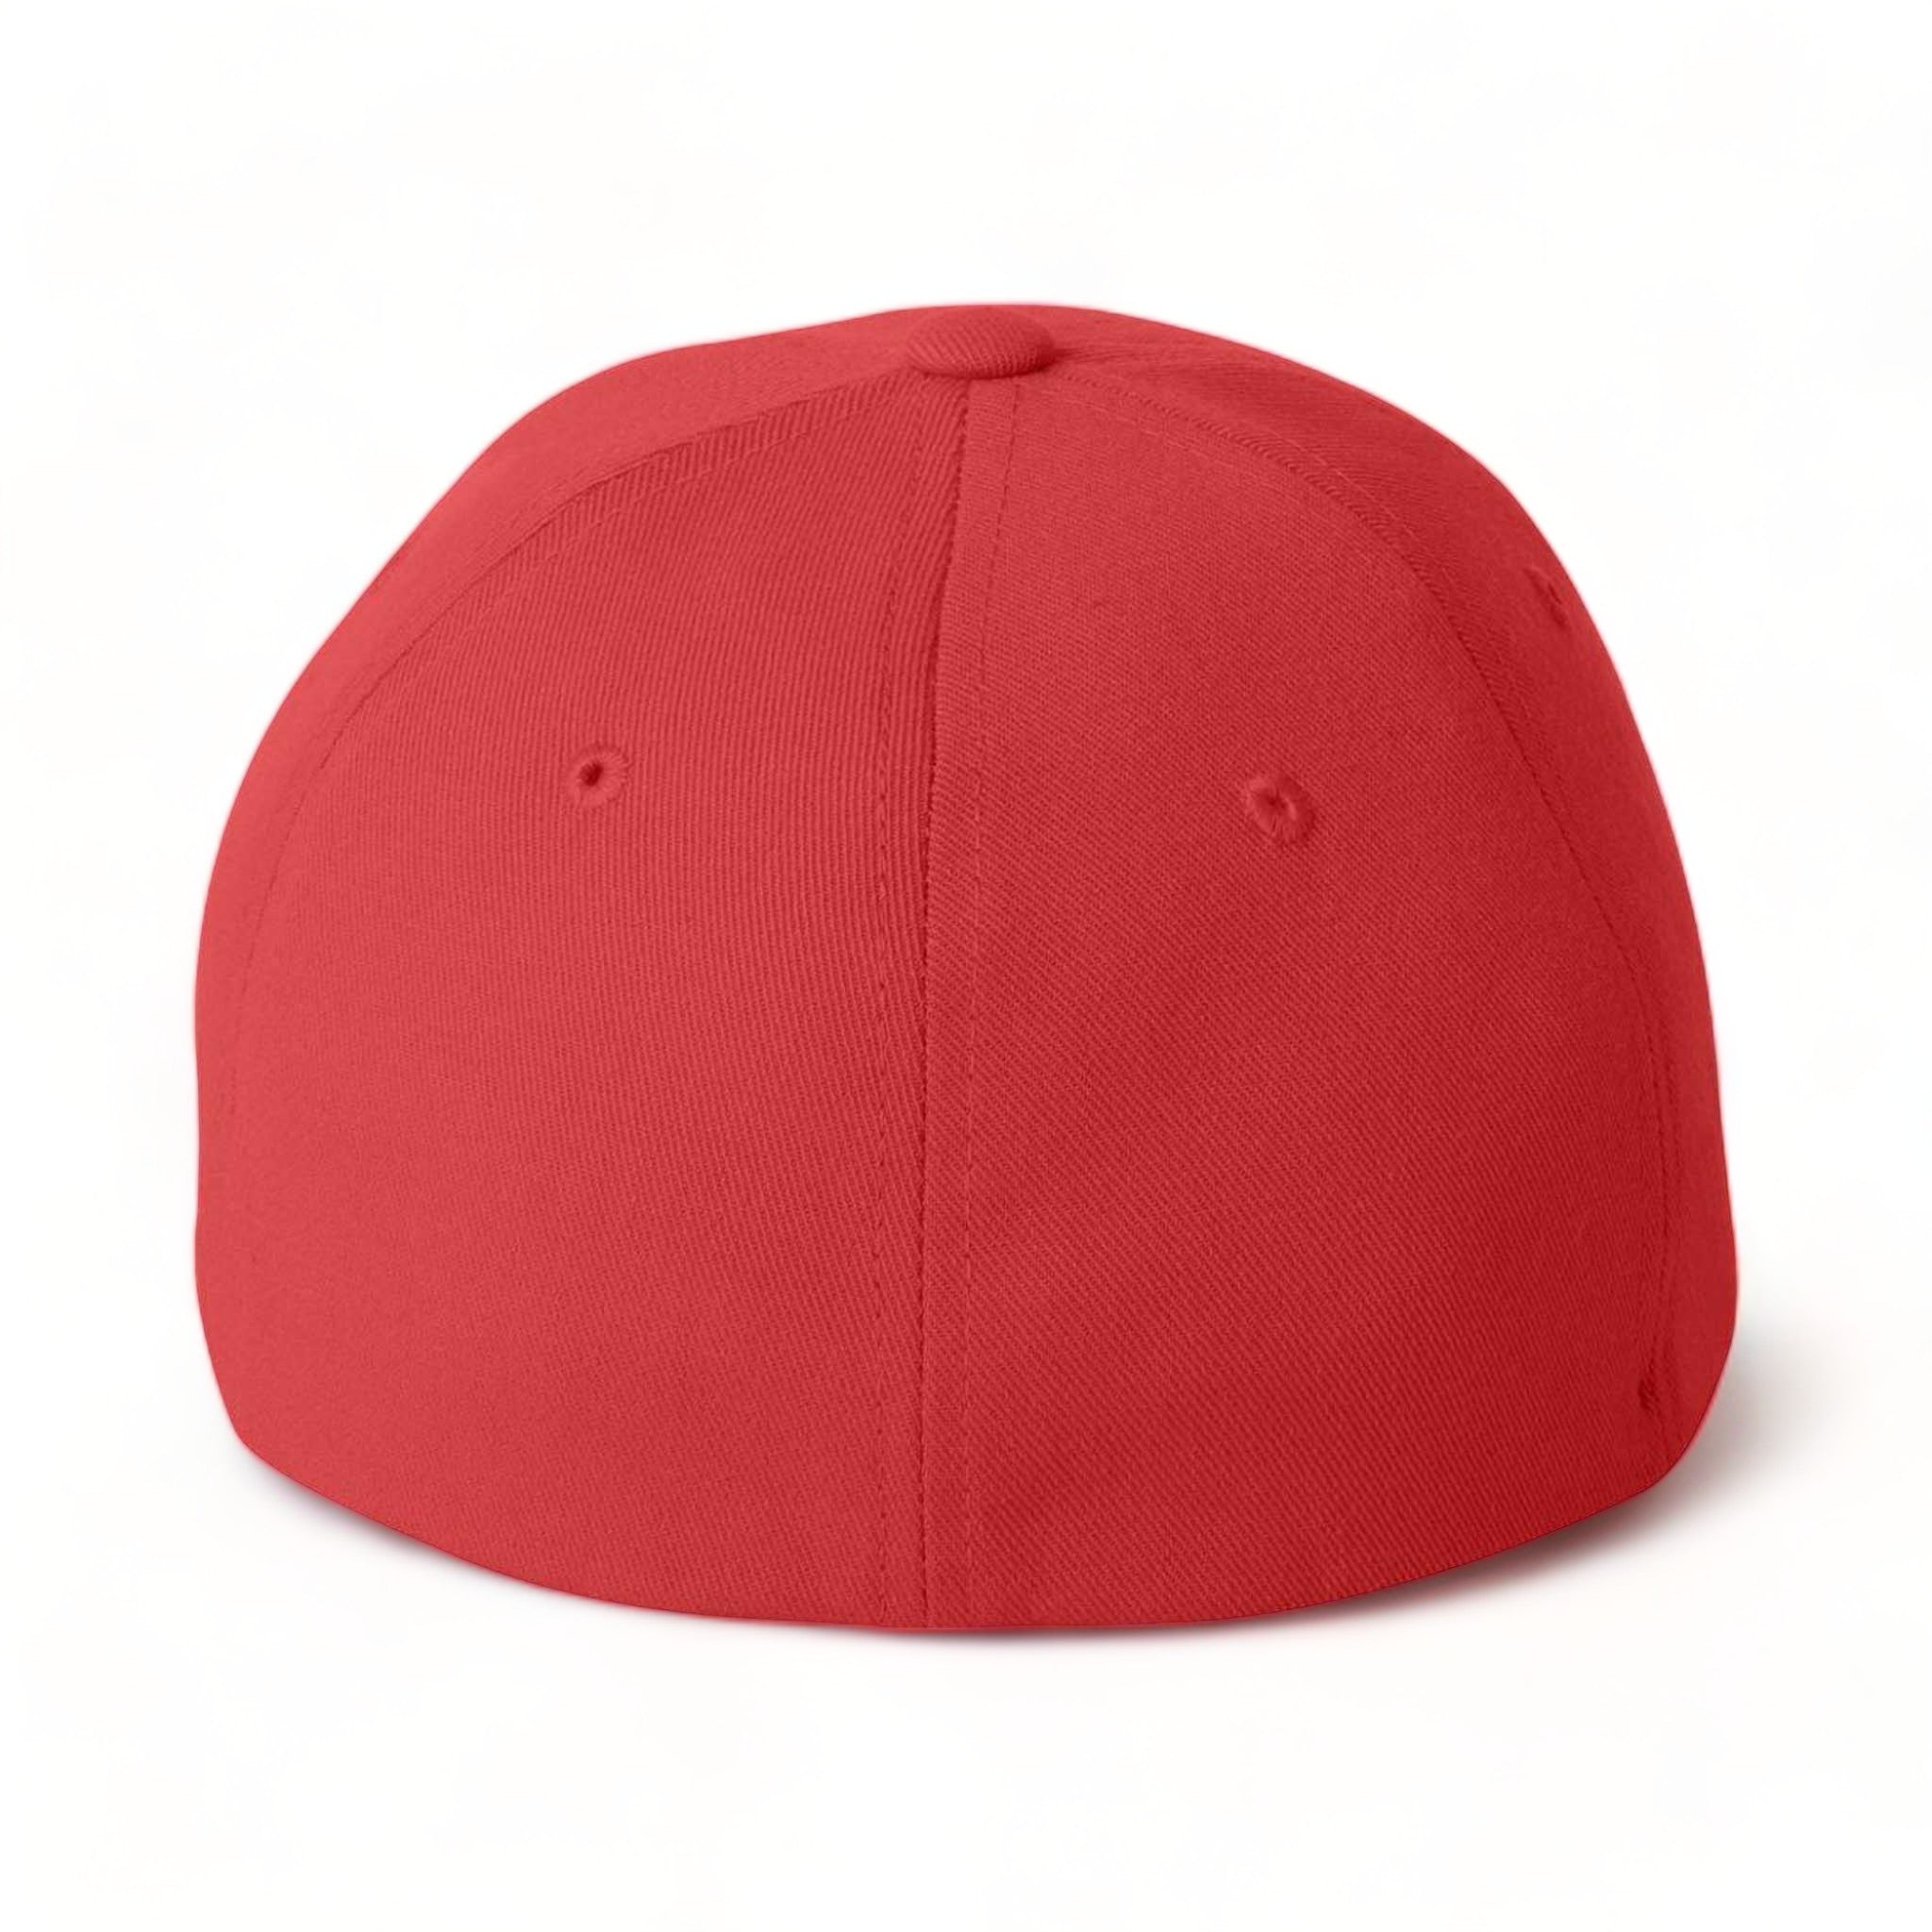 Back view of Flexfit 6580 custom hat in red